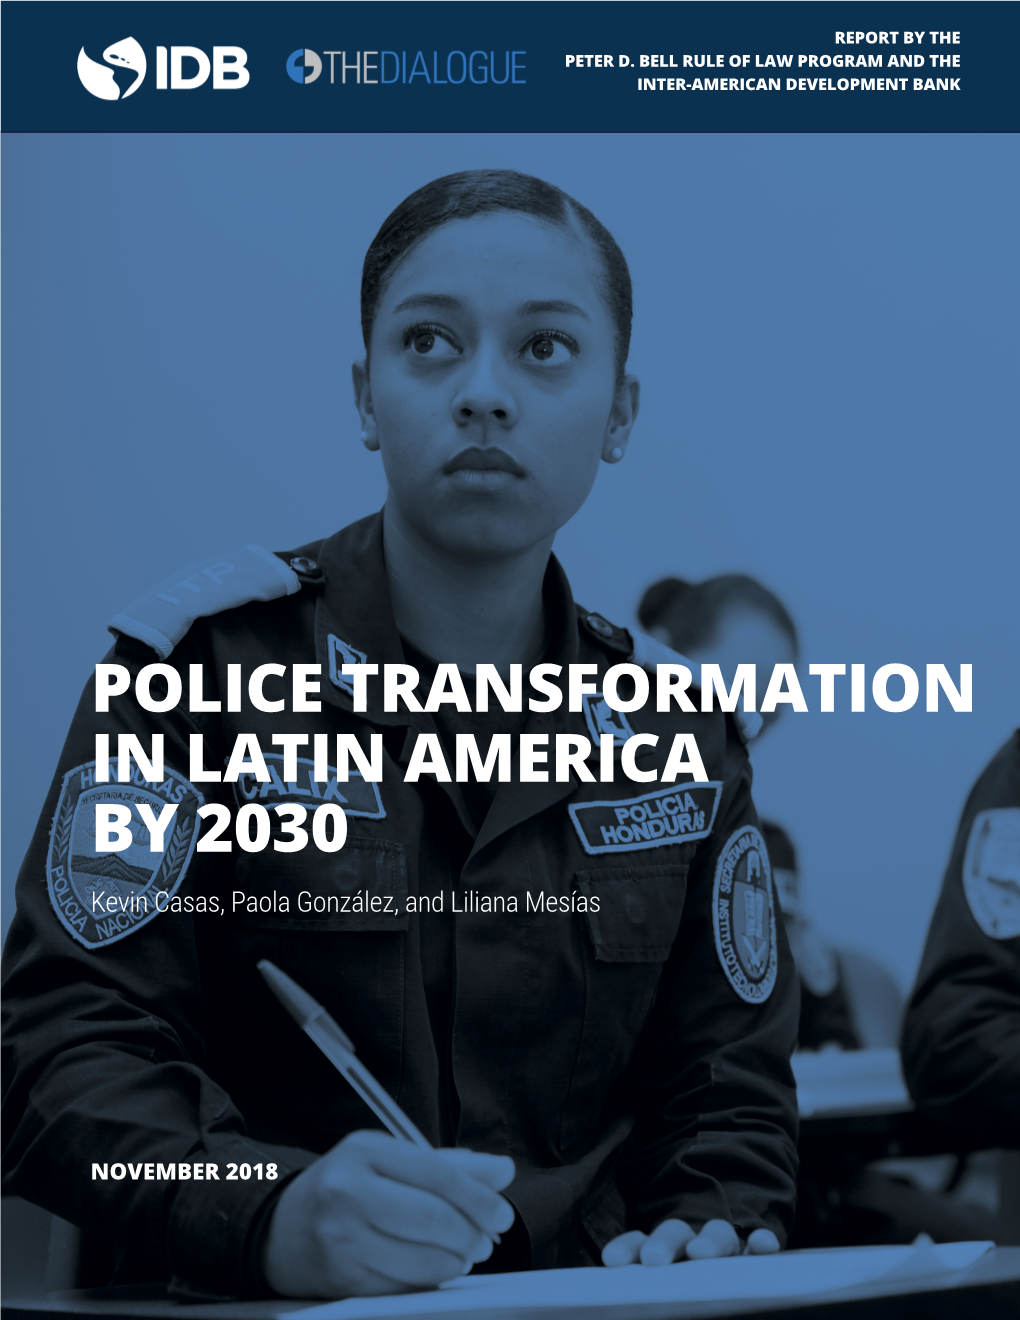 Police Transformation in Latin America by 2030